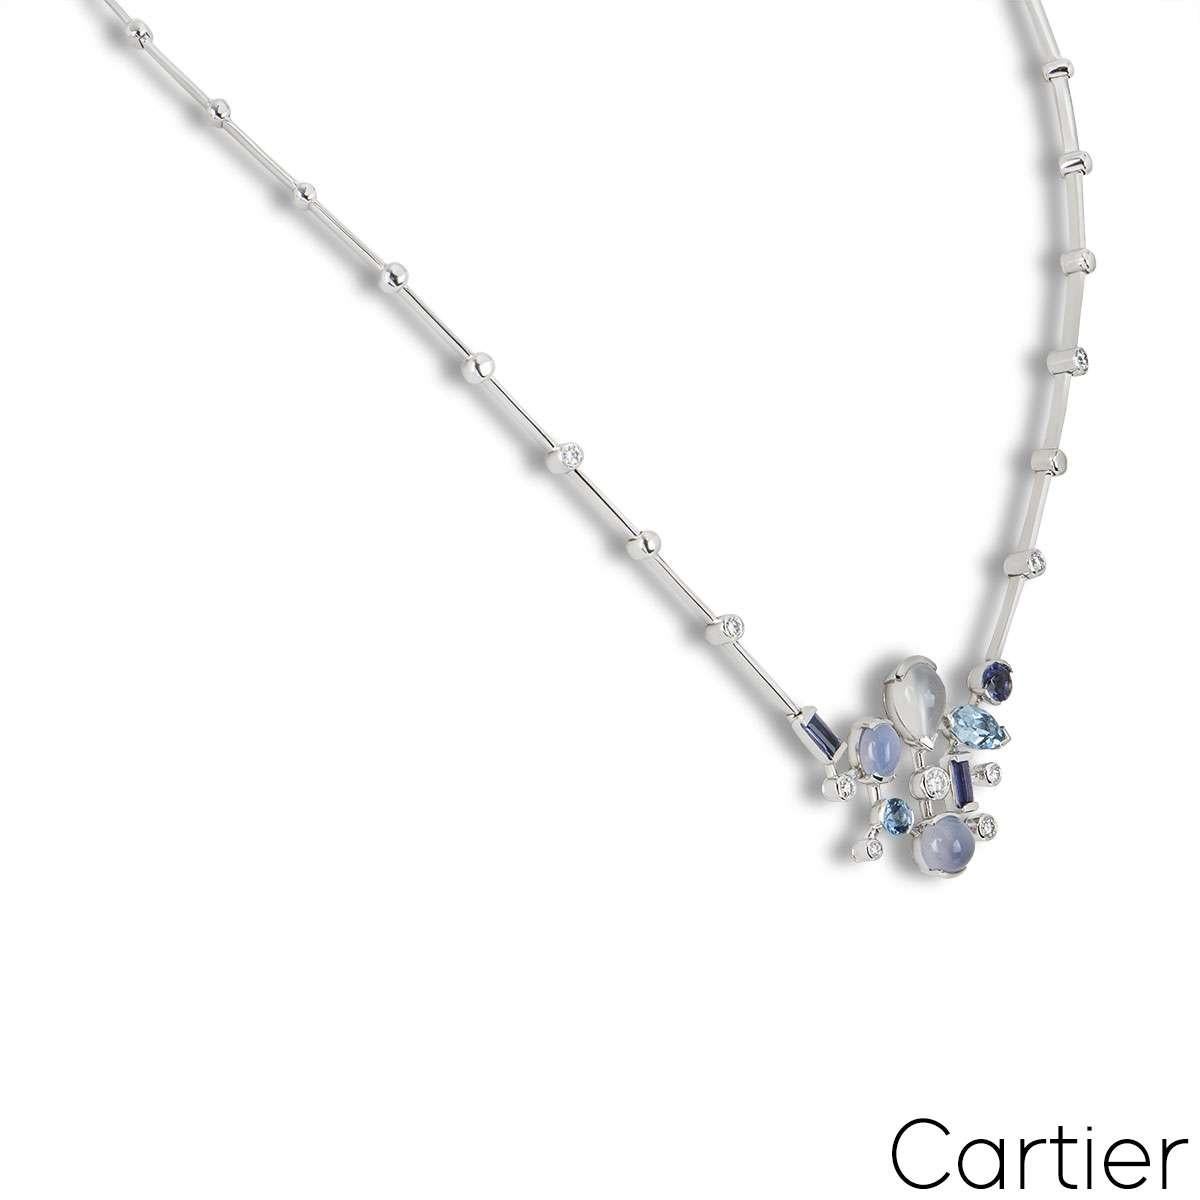 An 18k white gold Meli Melo necklace by Cartier. The necklace features a motif in the centre set with a cluster of diamonds and multi-shaped gemstones in an array of blue and grey hues. The necklace measures approximately 14 inches in length and has